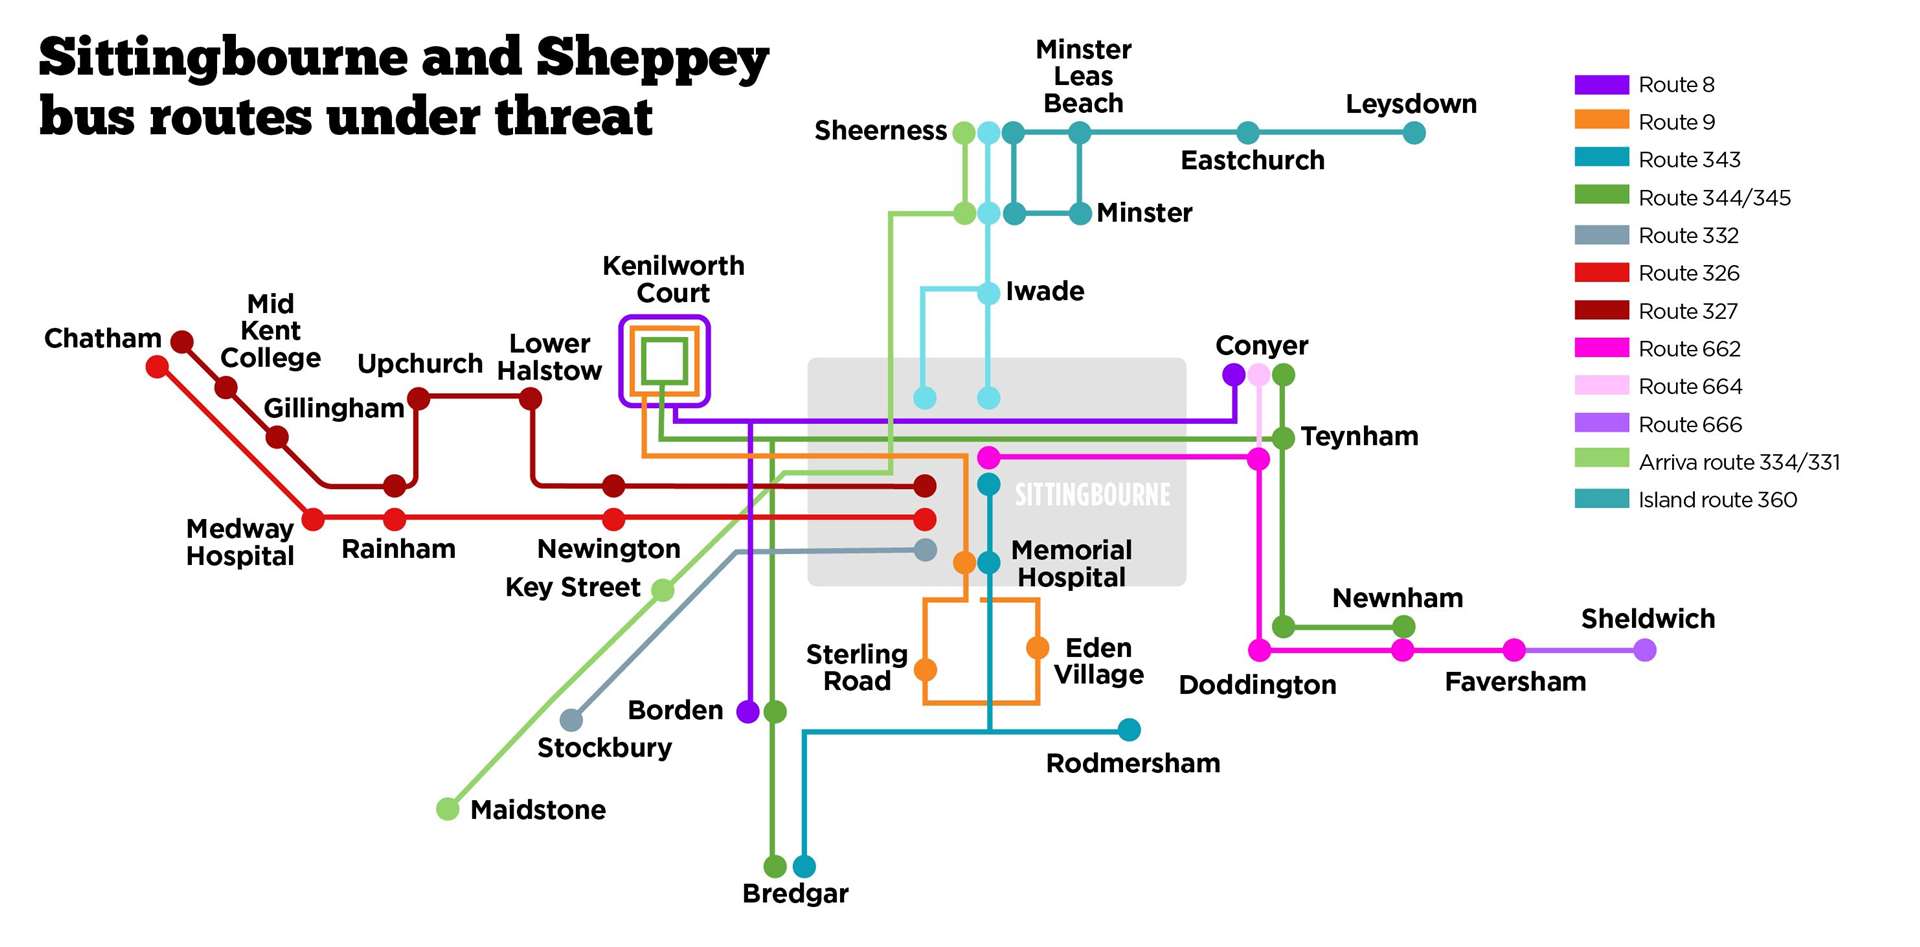 Swale bus routes under threat from KCC funding cuts. Picture: KM Graphics